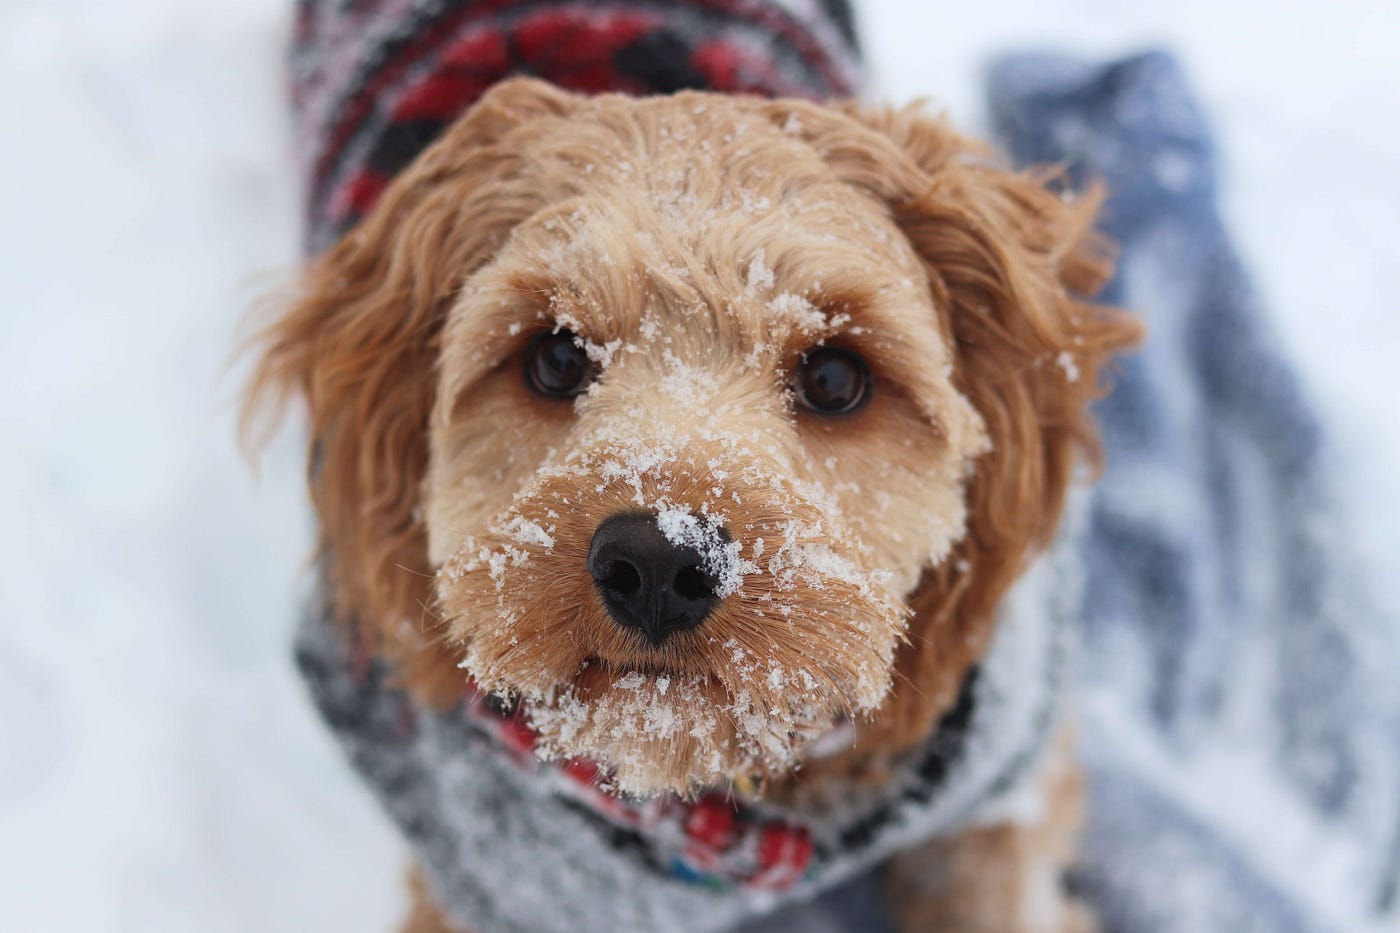 How long can I walk my dog in the cold weather? When the weather gets chilly, many dog owners might be wondering - do dogs even need to go for a walk in the winter? How cold is *too cold* for a dog? How long should I walk my dog in the cold?